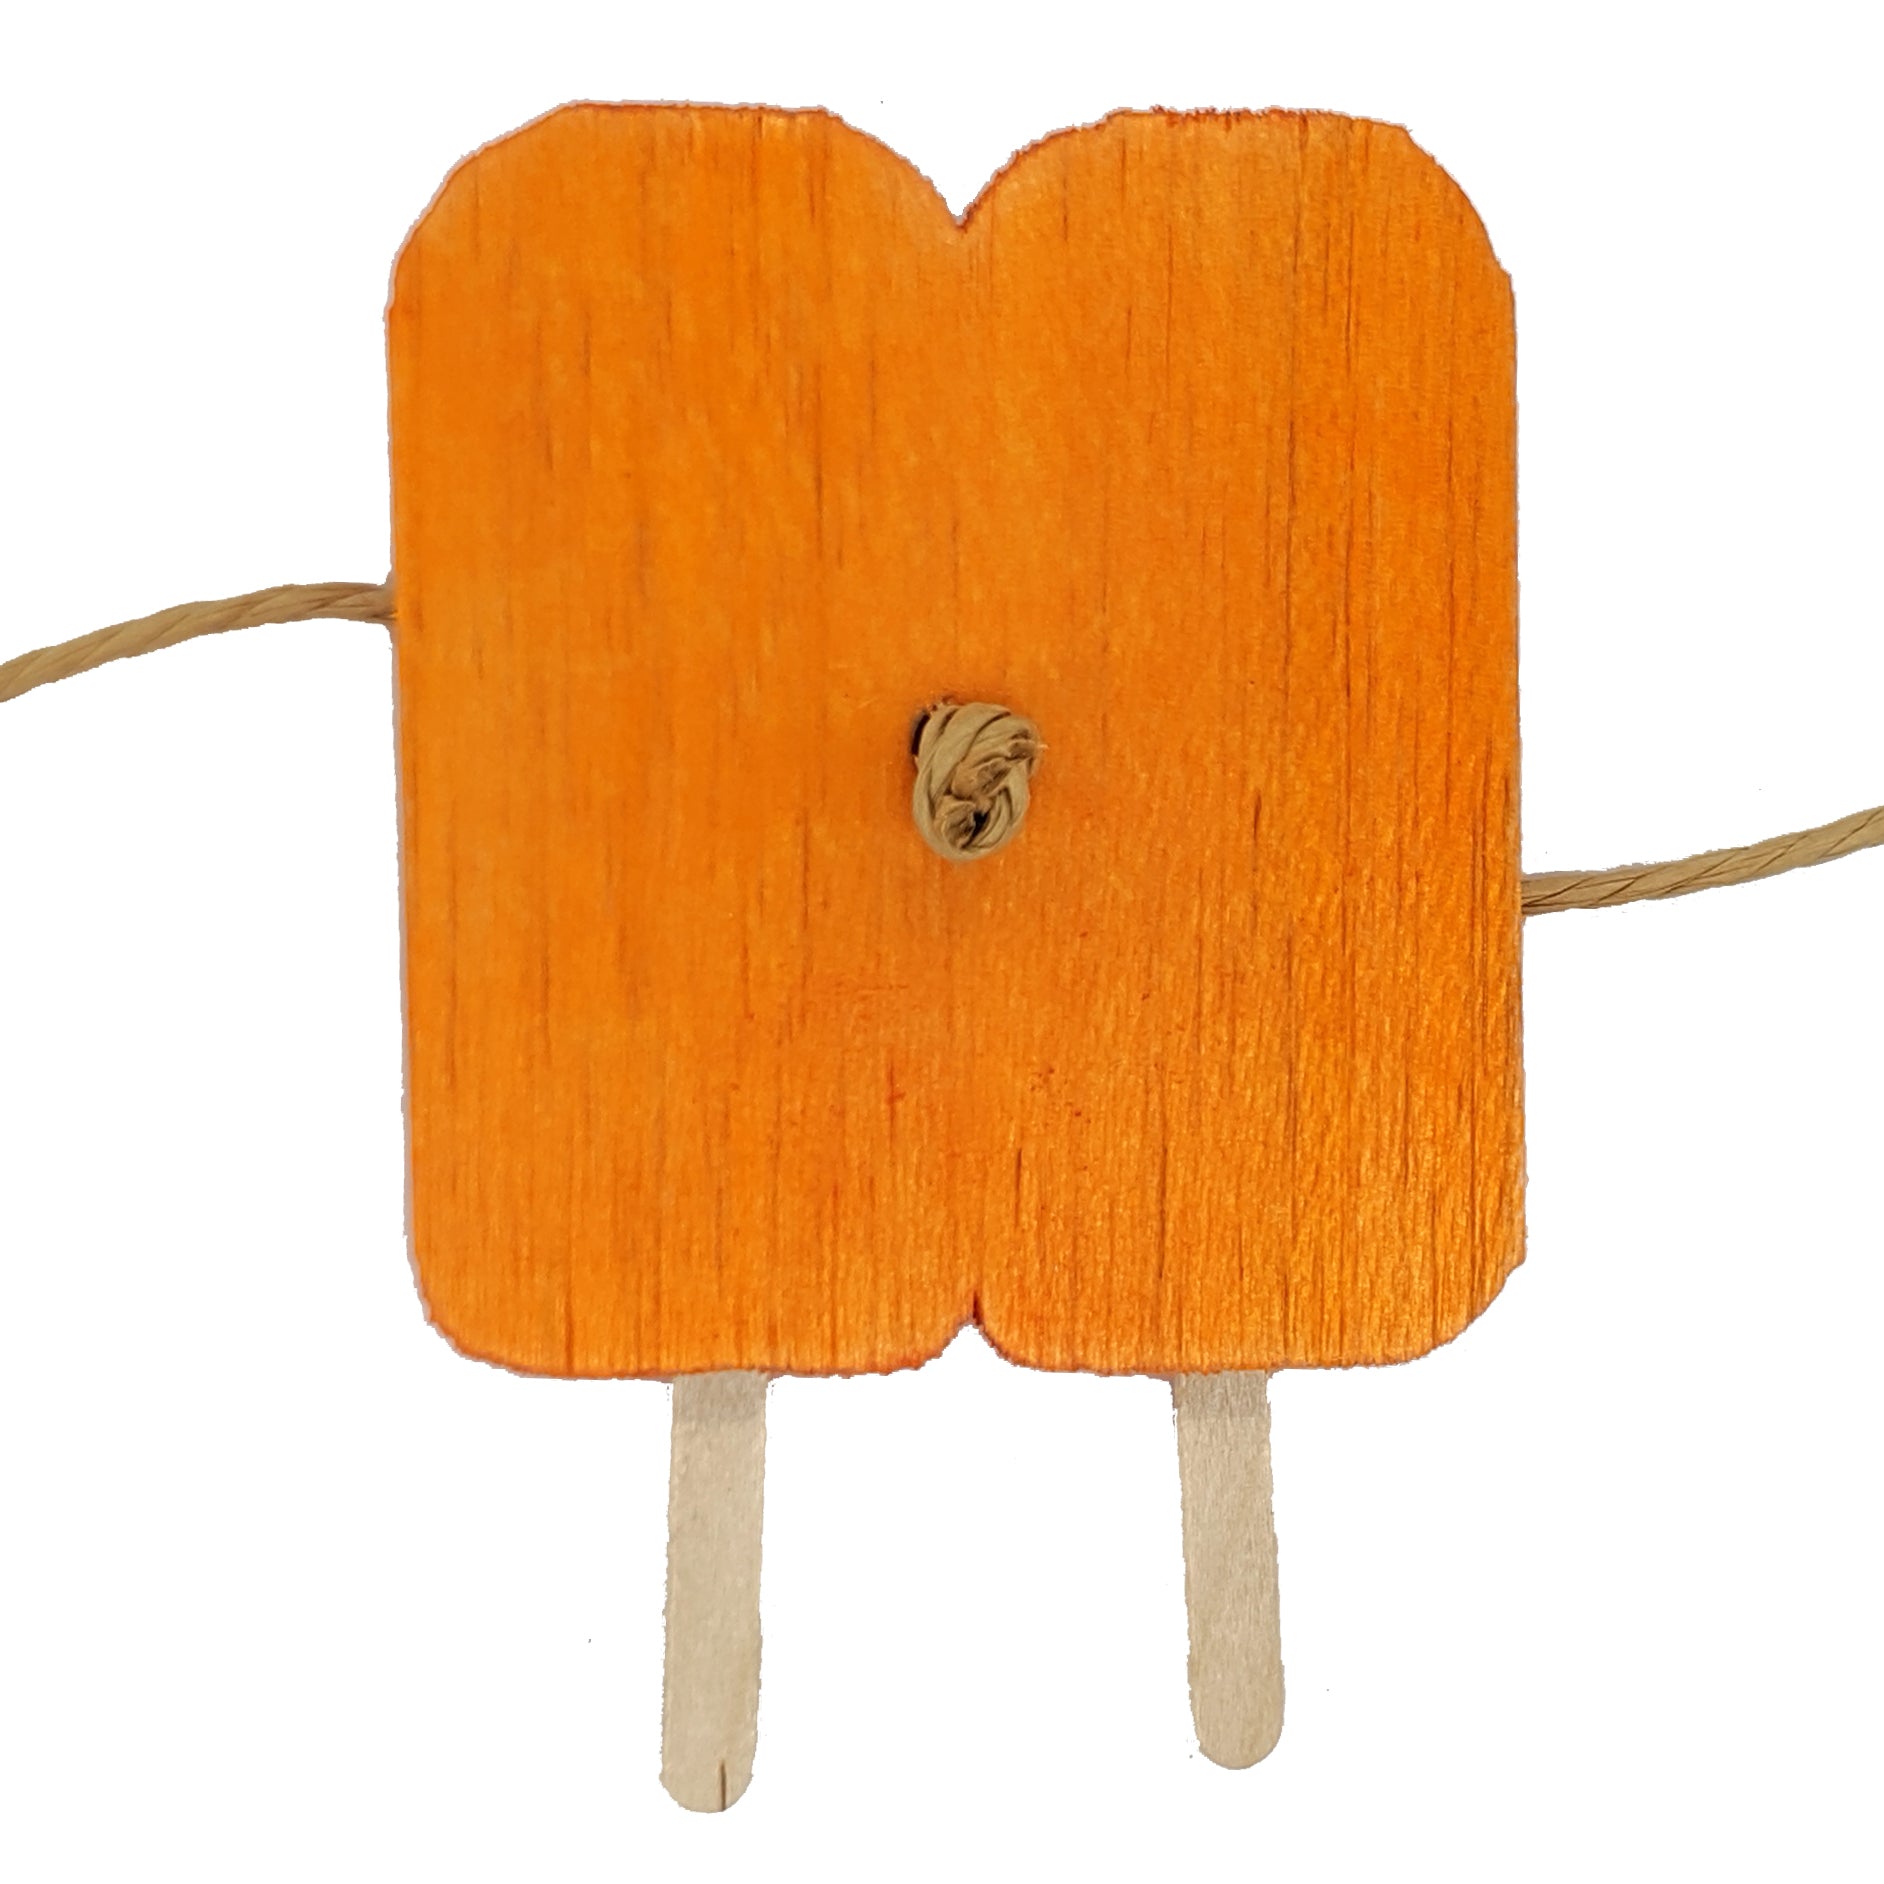 A twin popsicle shaped piece of balsa with popsicle sticks coming out the bottom, and paper rope through the middle